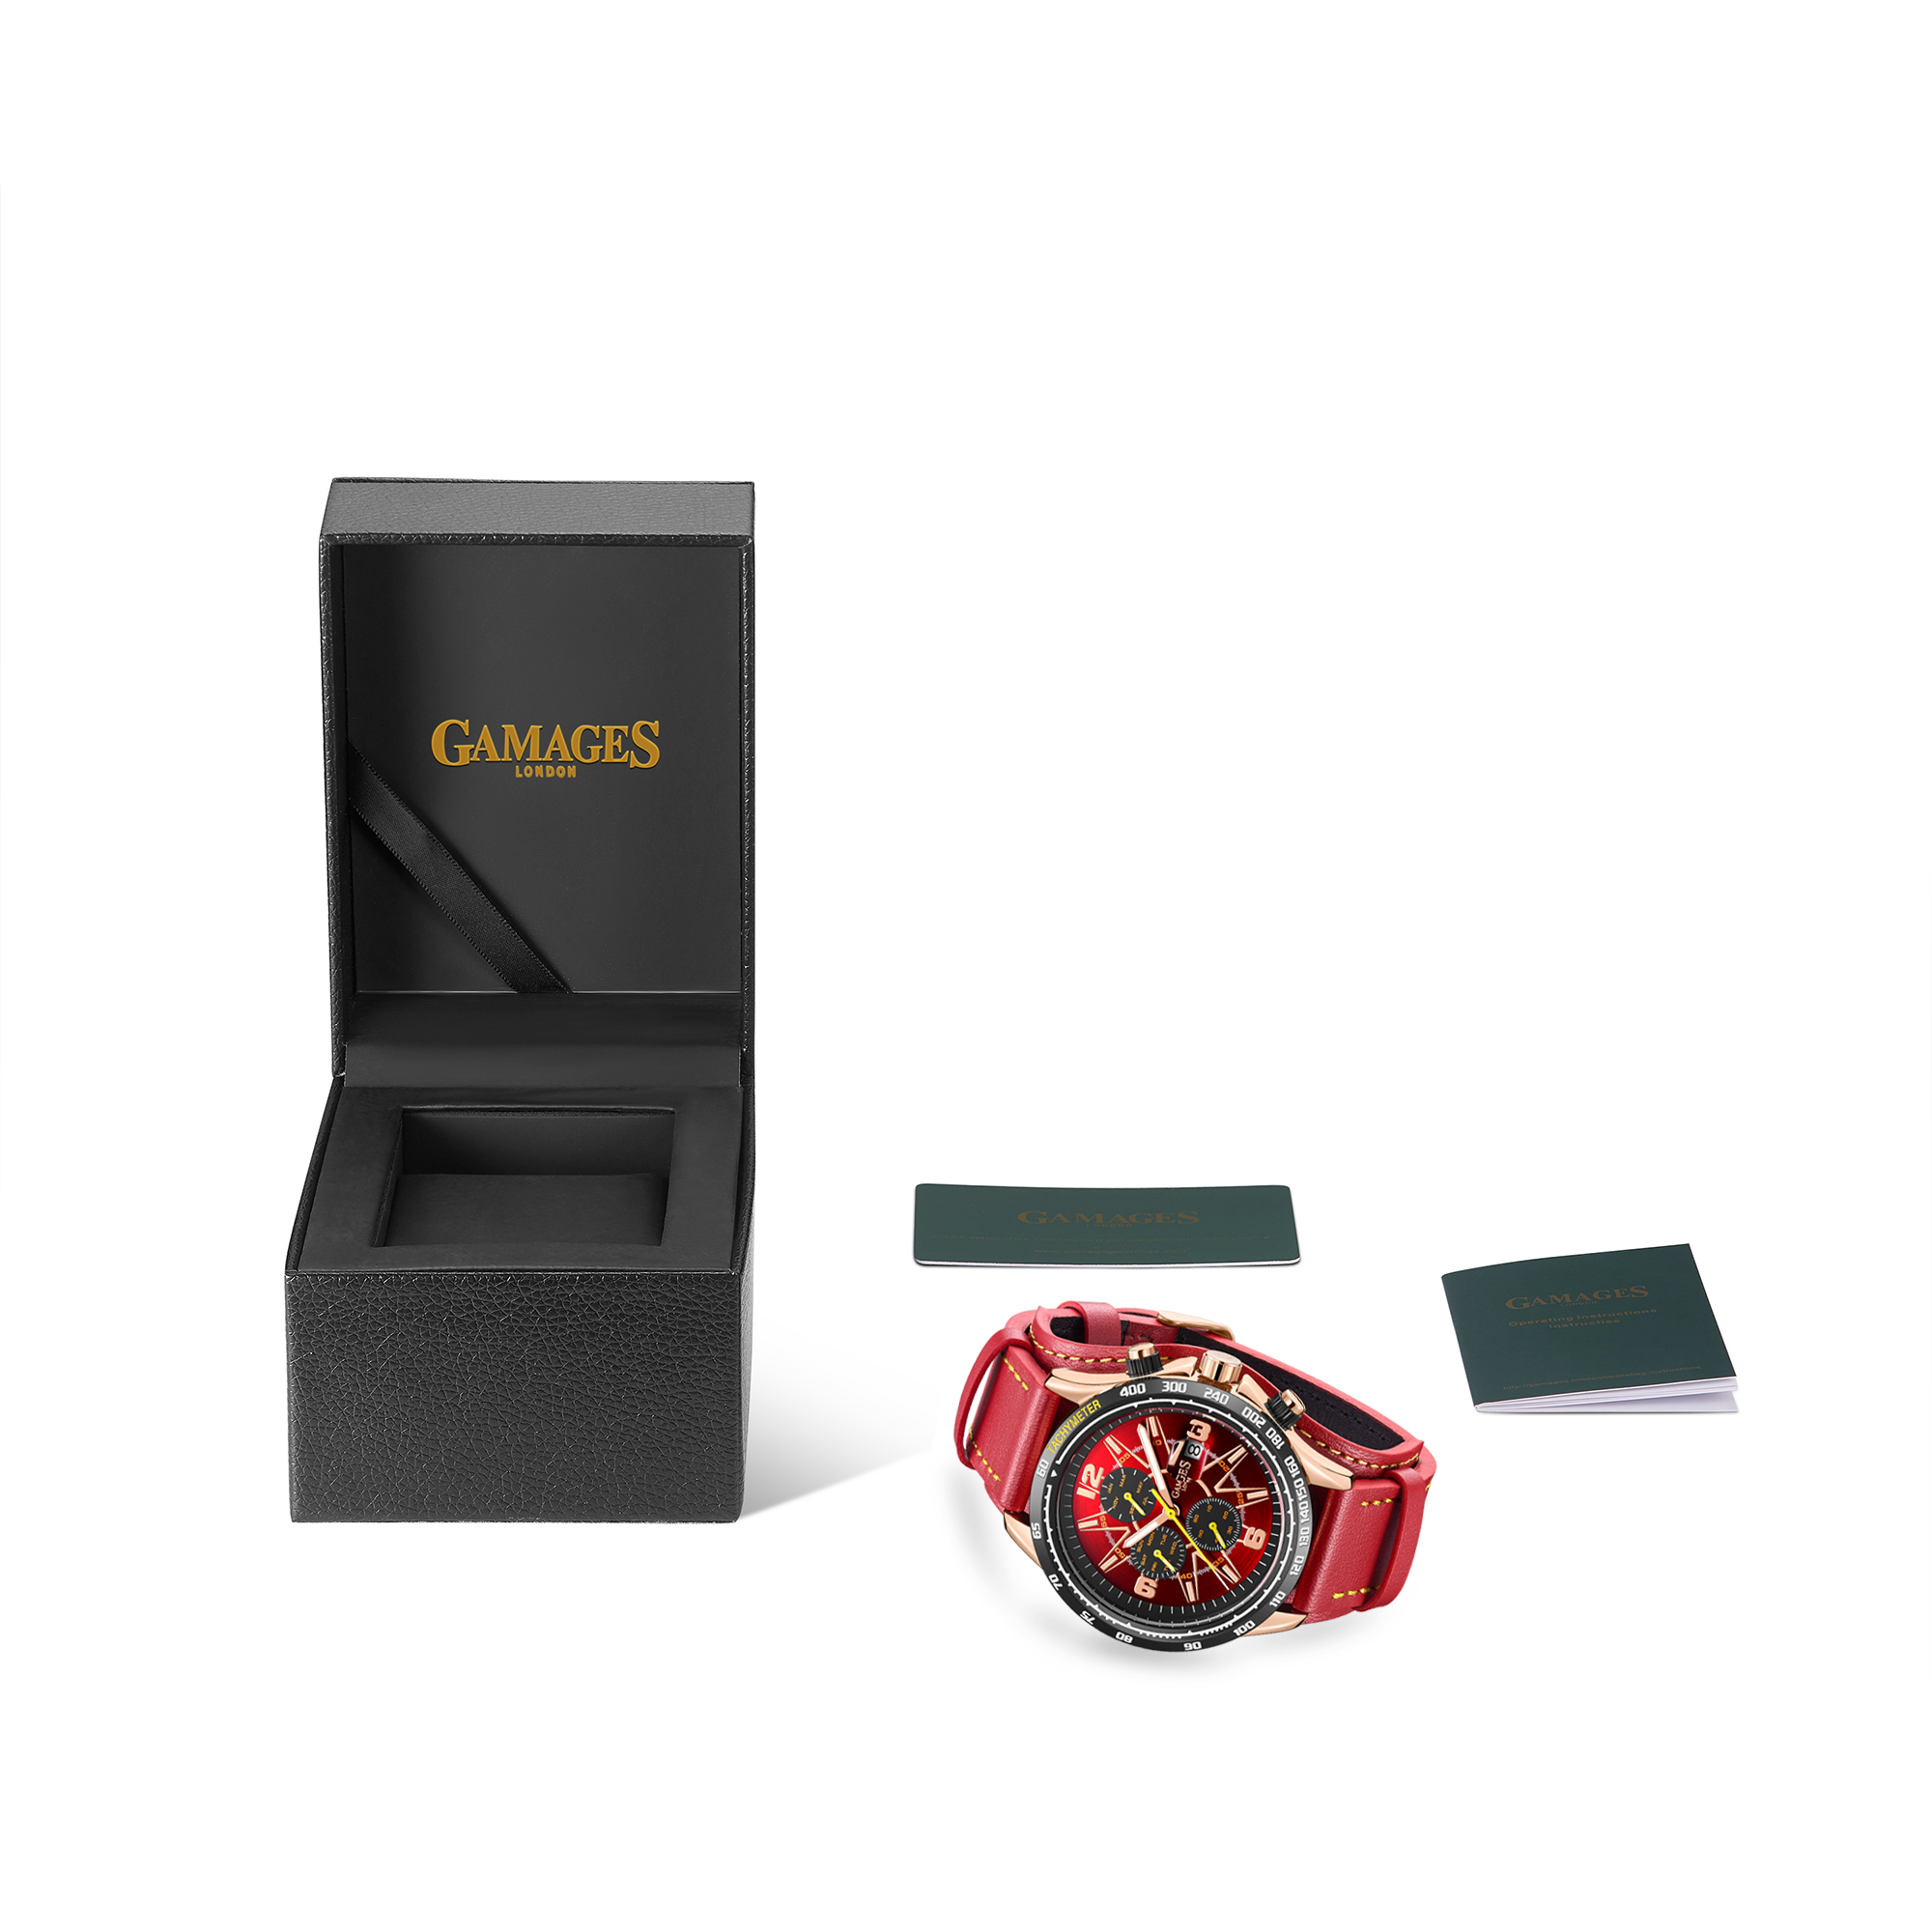 GAMAGES OF LONDON Hand Assembled Gauge Racer Automatic Red - Free Delivery & 5 Year Warranty - Image 2 of 5